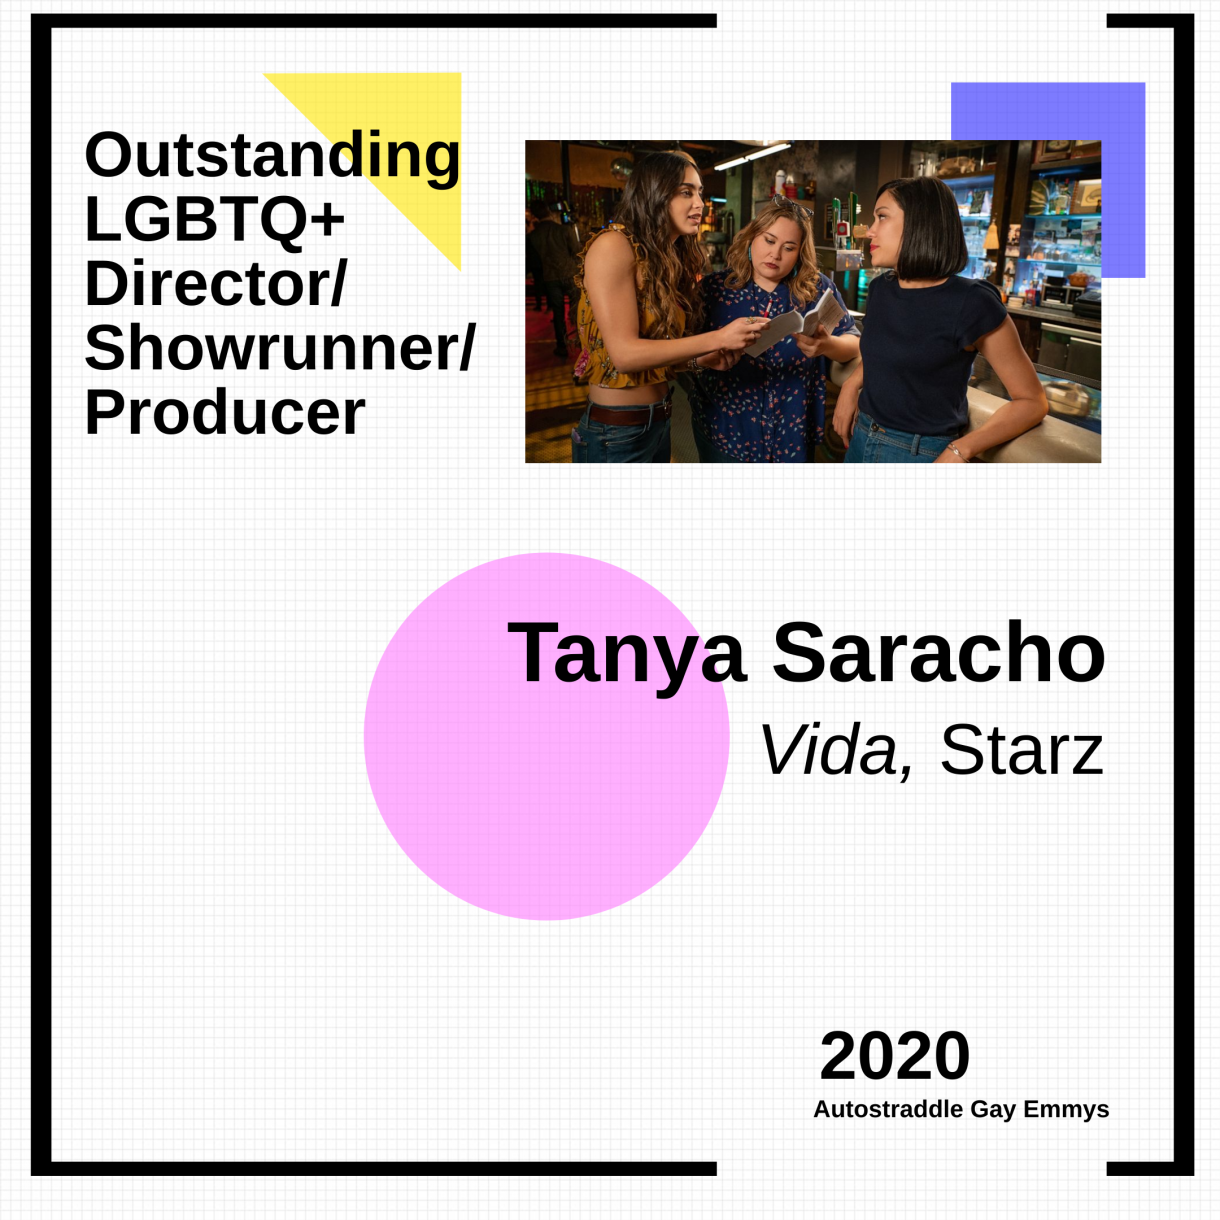 Colorful graphic announcing Outstanding LGBTQ+ Director / Producer / Writer / Showrunner: Tanya Sarracho, Vida (Starz). Picture of Tanya with actresses on set.